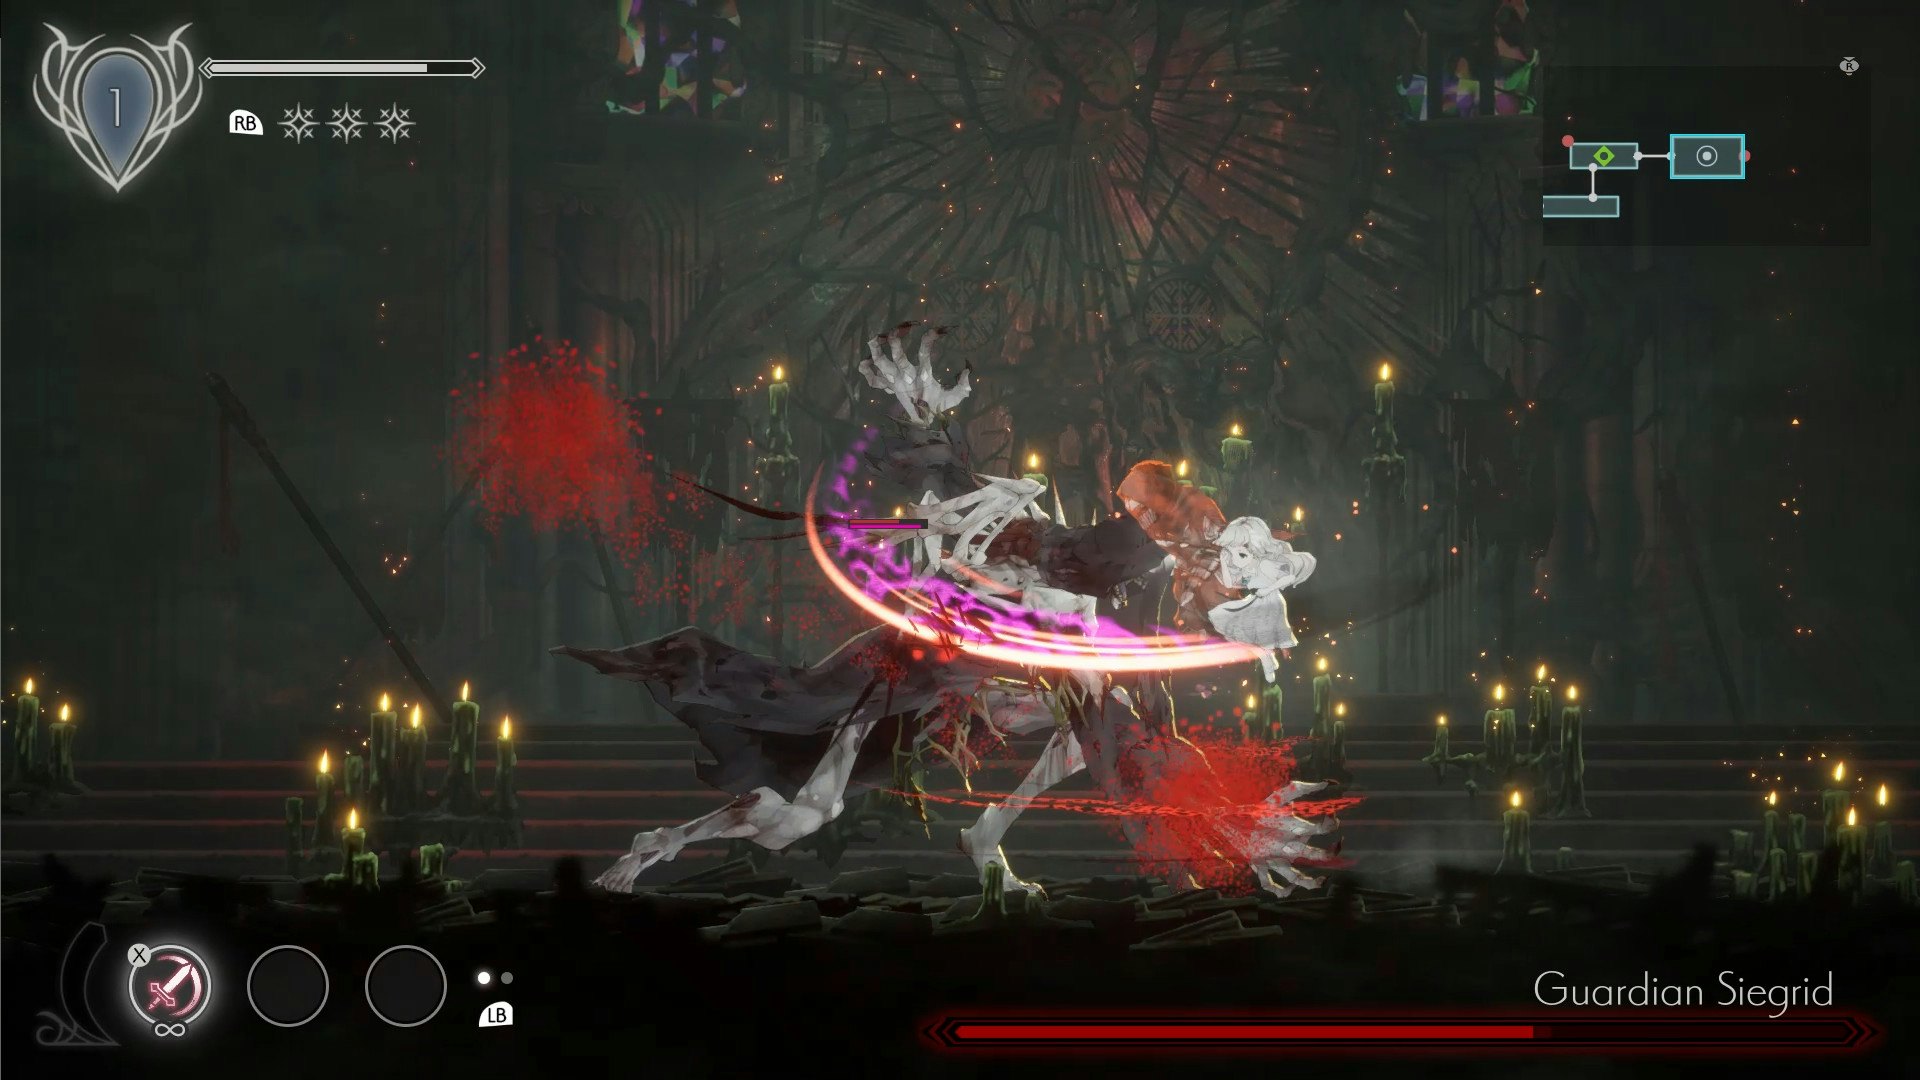 Ender Lilies Will Be a Metroidvania Where Defeated Bosses Become Allies